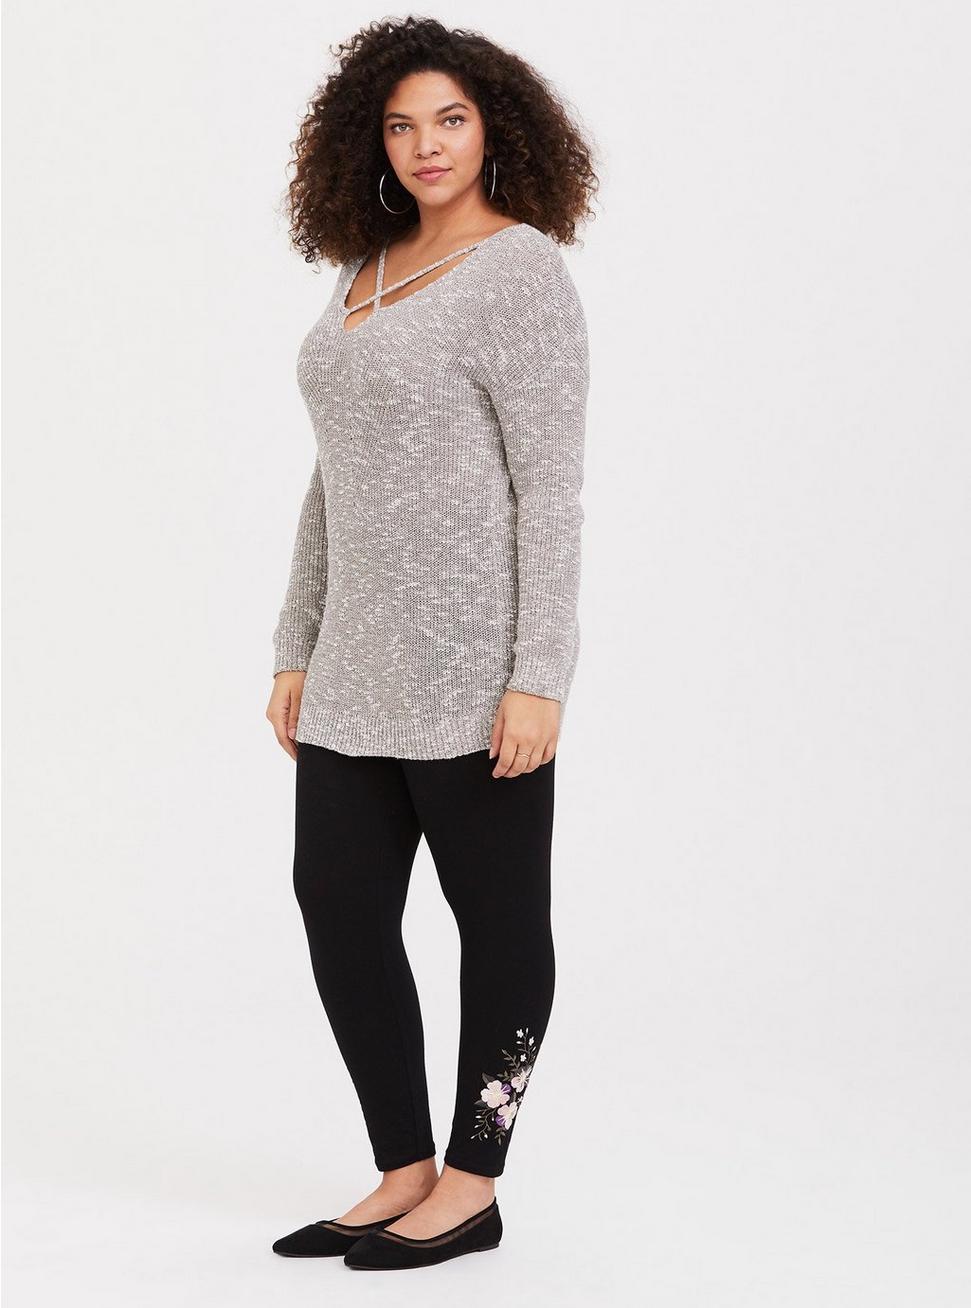 Plus Size - Embroidered Bead in Meadow Legging - Torrid